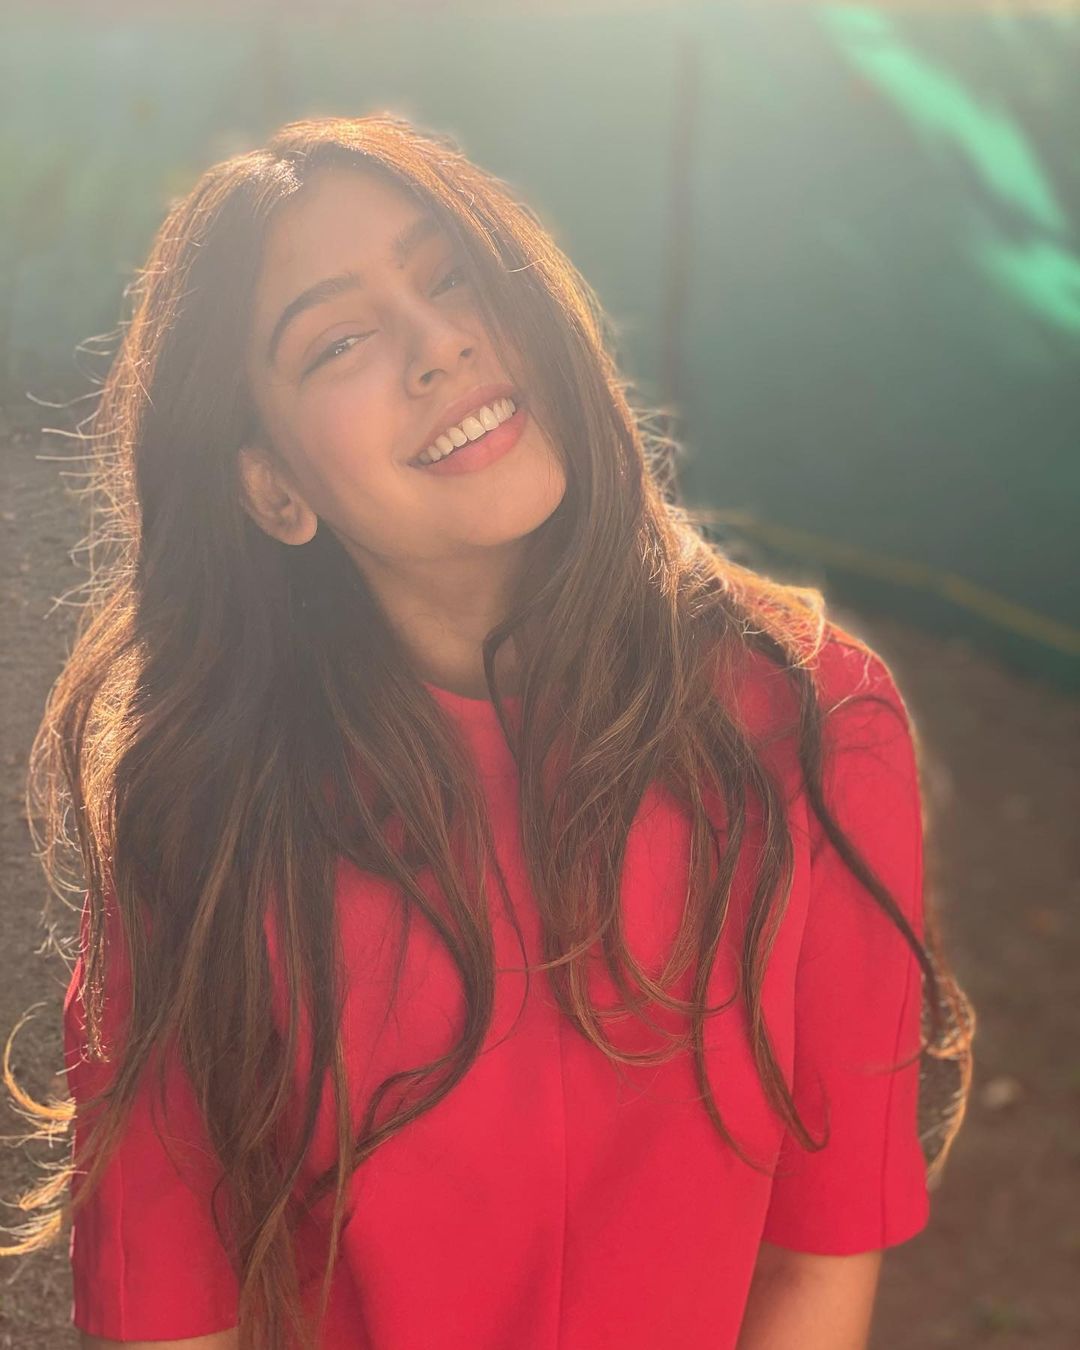 Niti Taylor Explains Why She's Been 'Lying Low' Since Her Wedding & Refusing Work Offers: I Swear I Do Want To Come Back